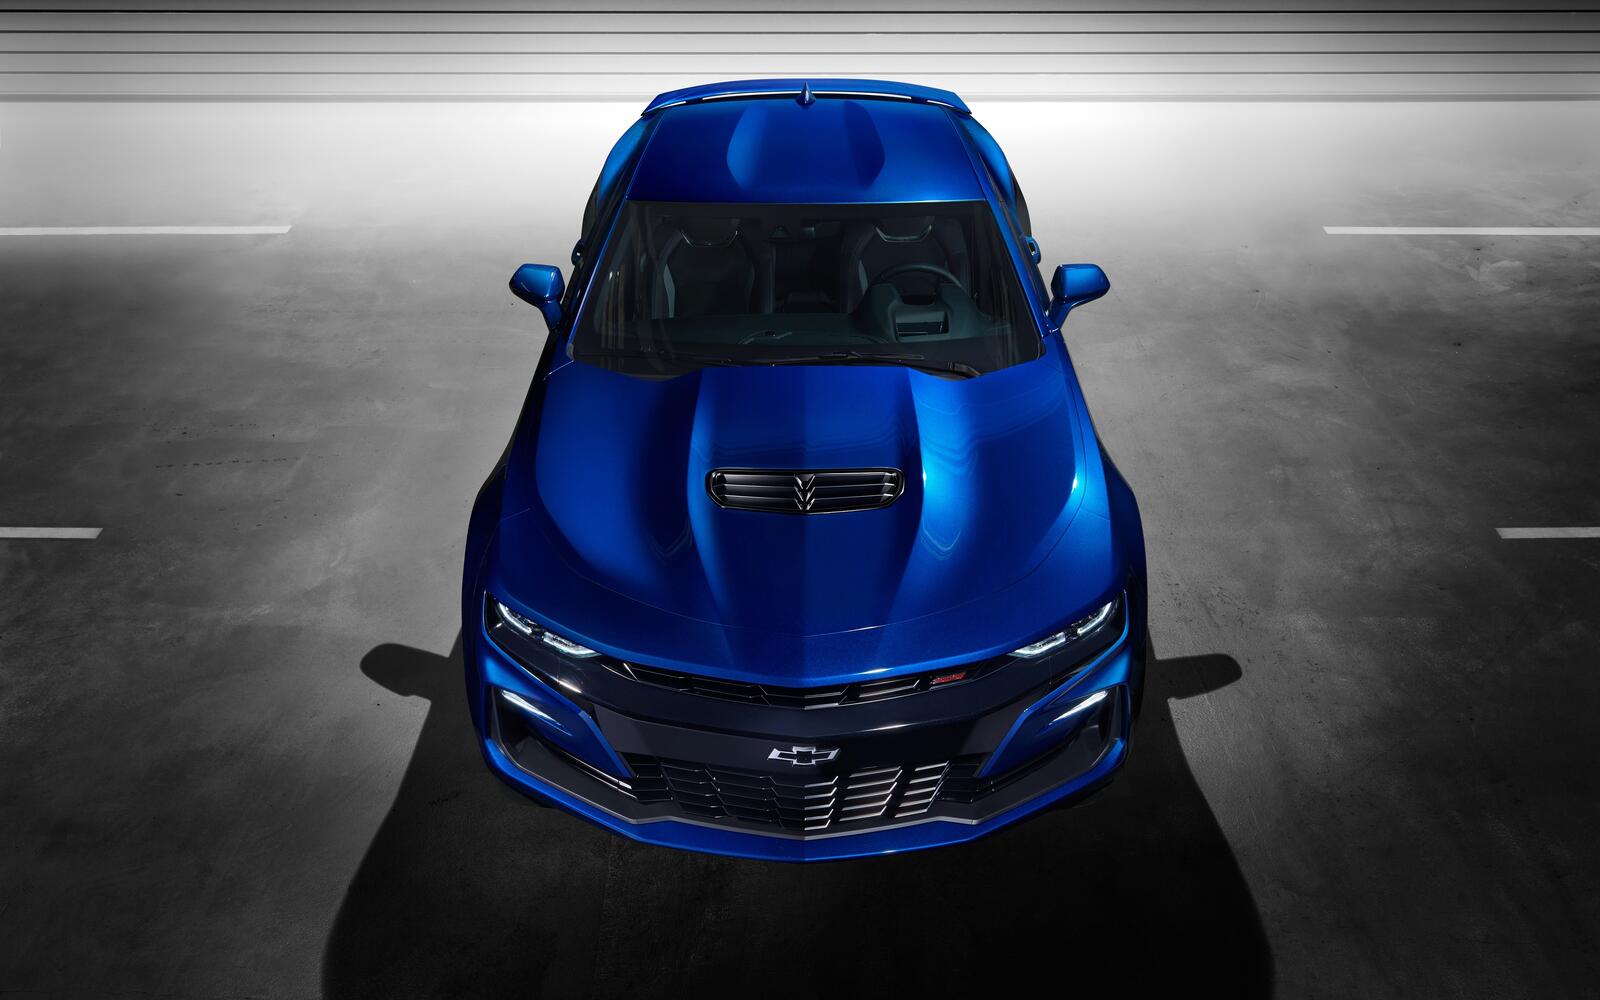 Wallpapers wallpaper chevrolet camaro blue muscle cars top front view on the desktop